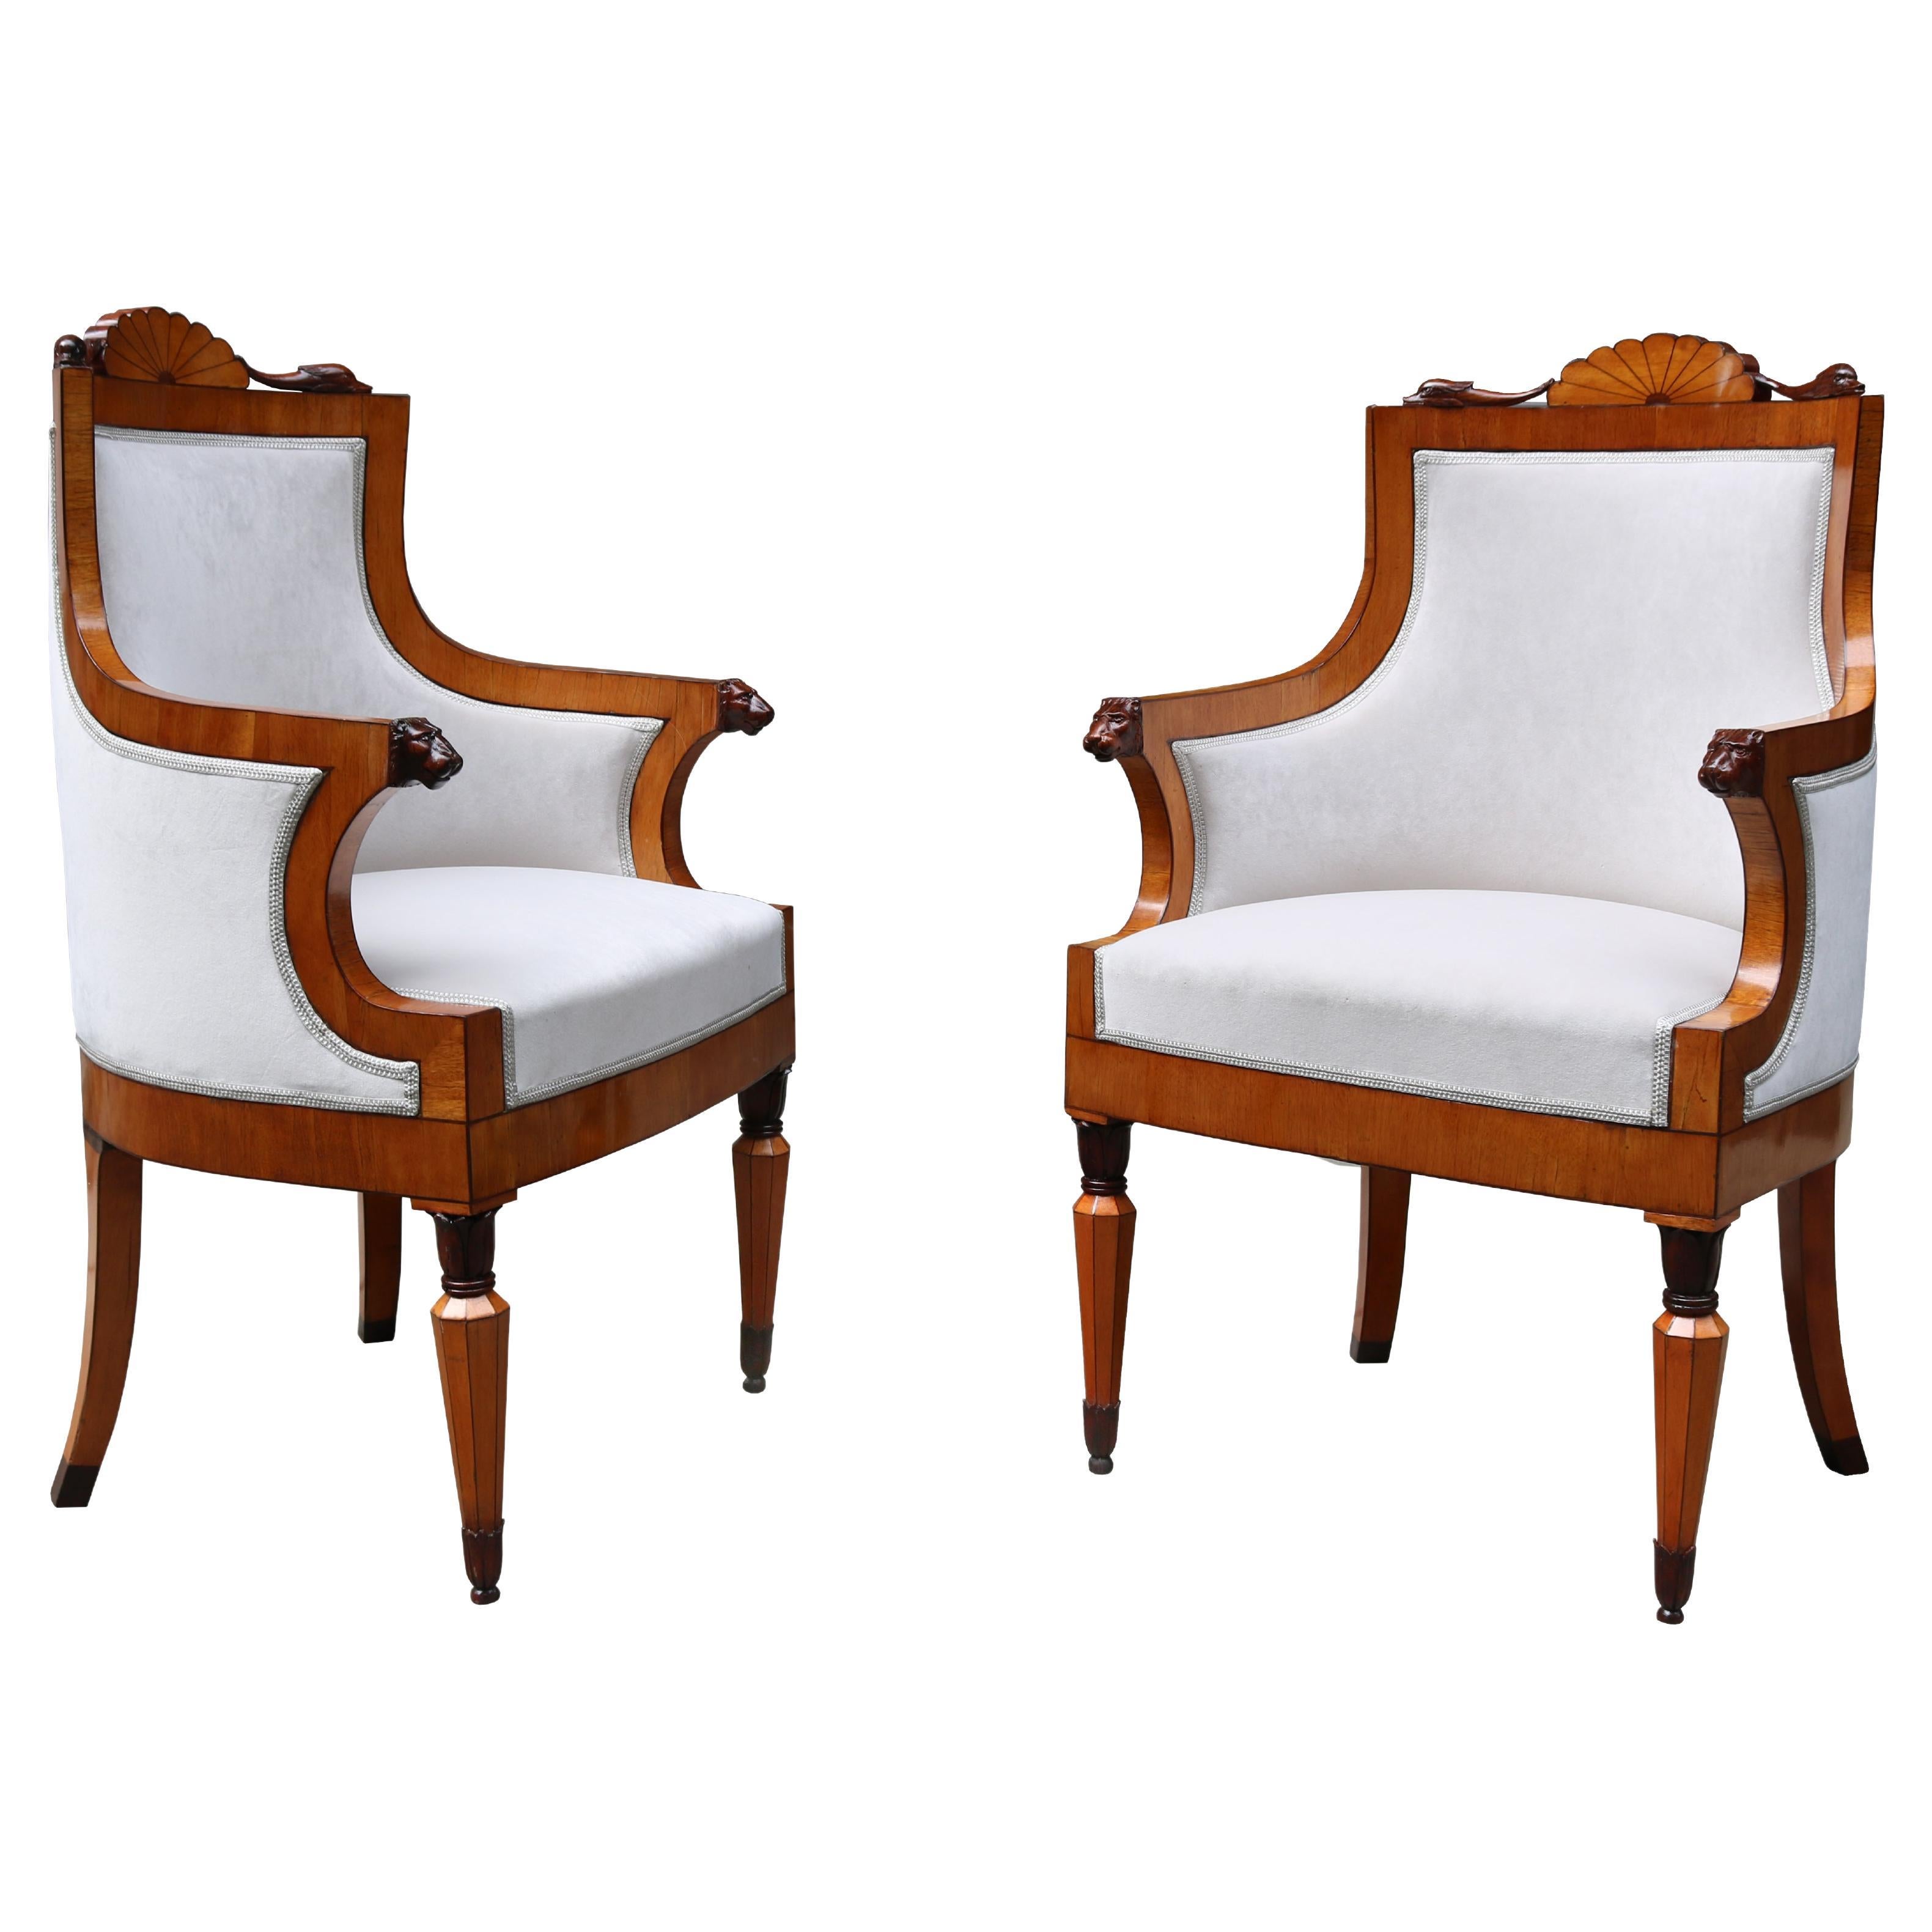 Fine Pair of Neoclassical Armchairs